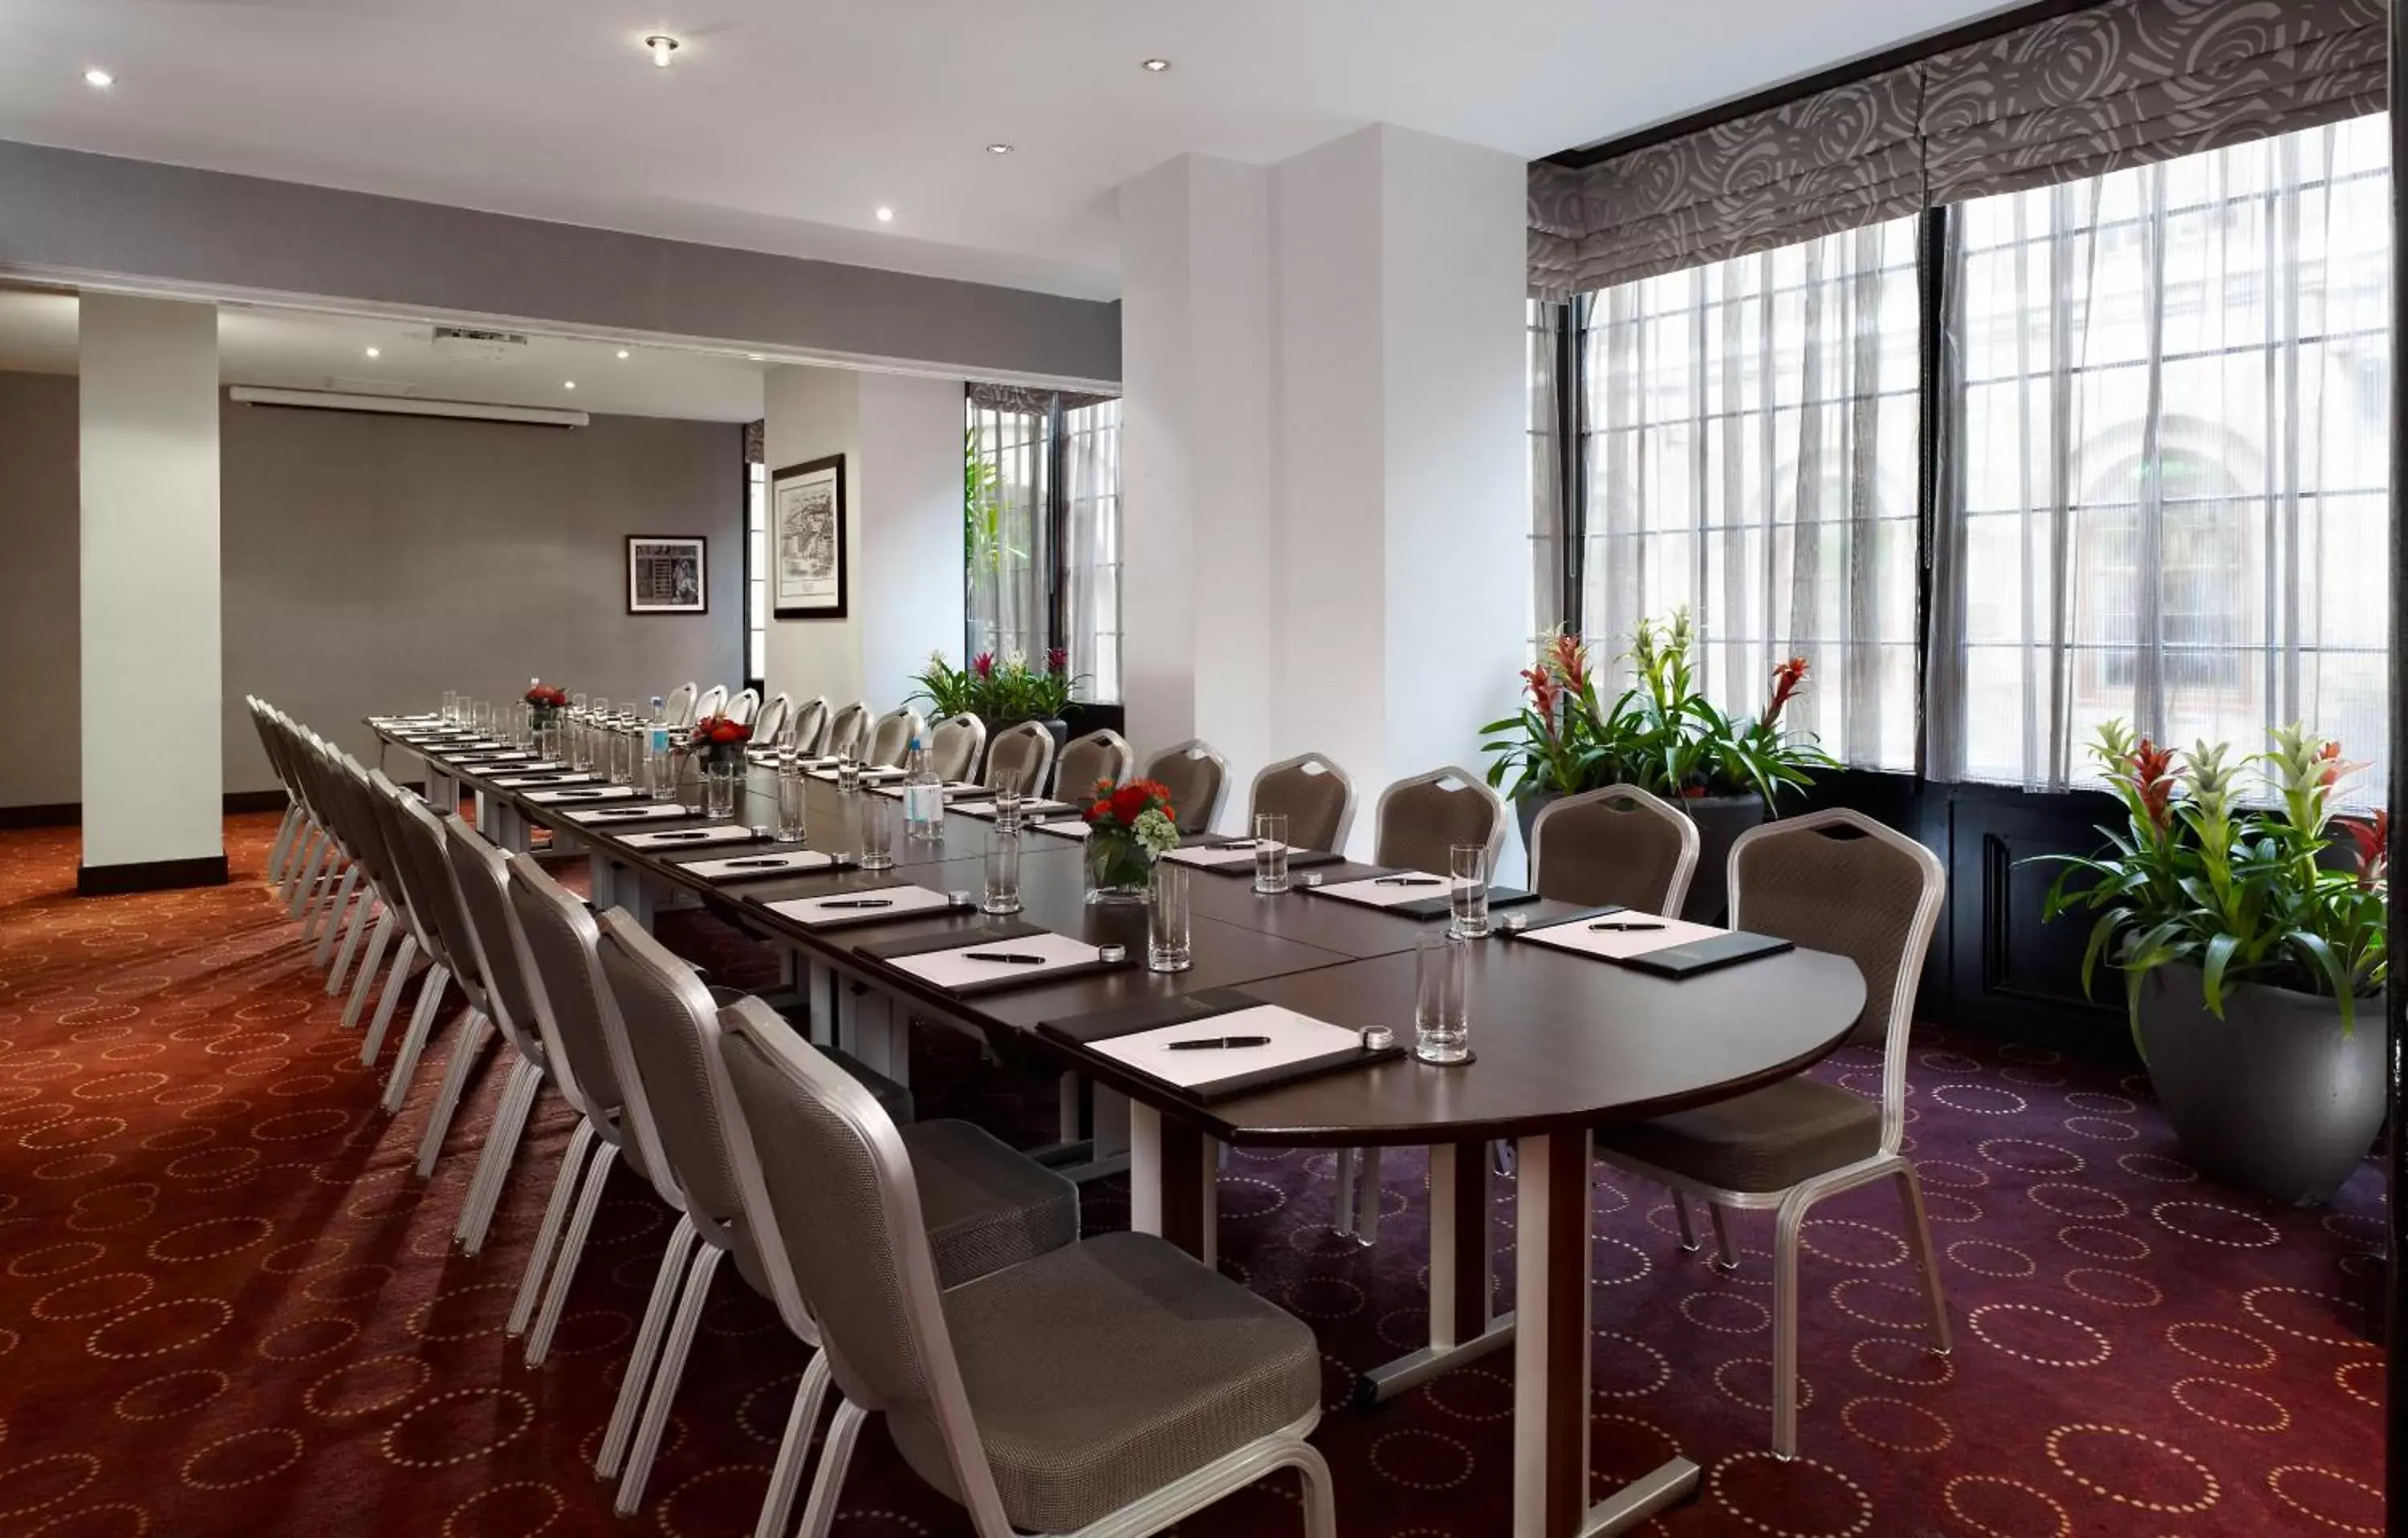 Business facilities in The Montcalm At Brewery London City